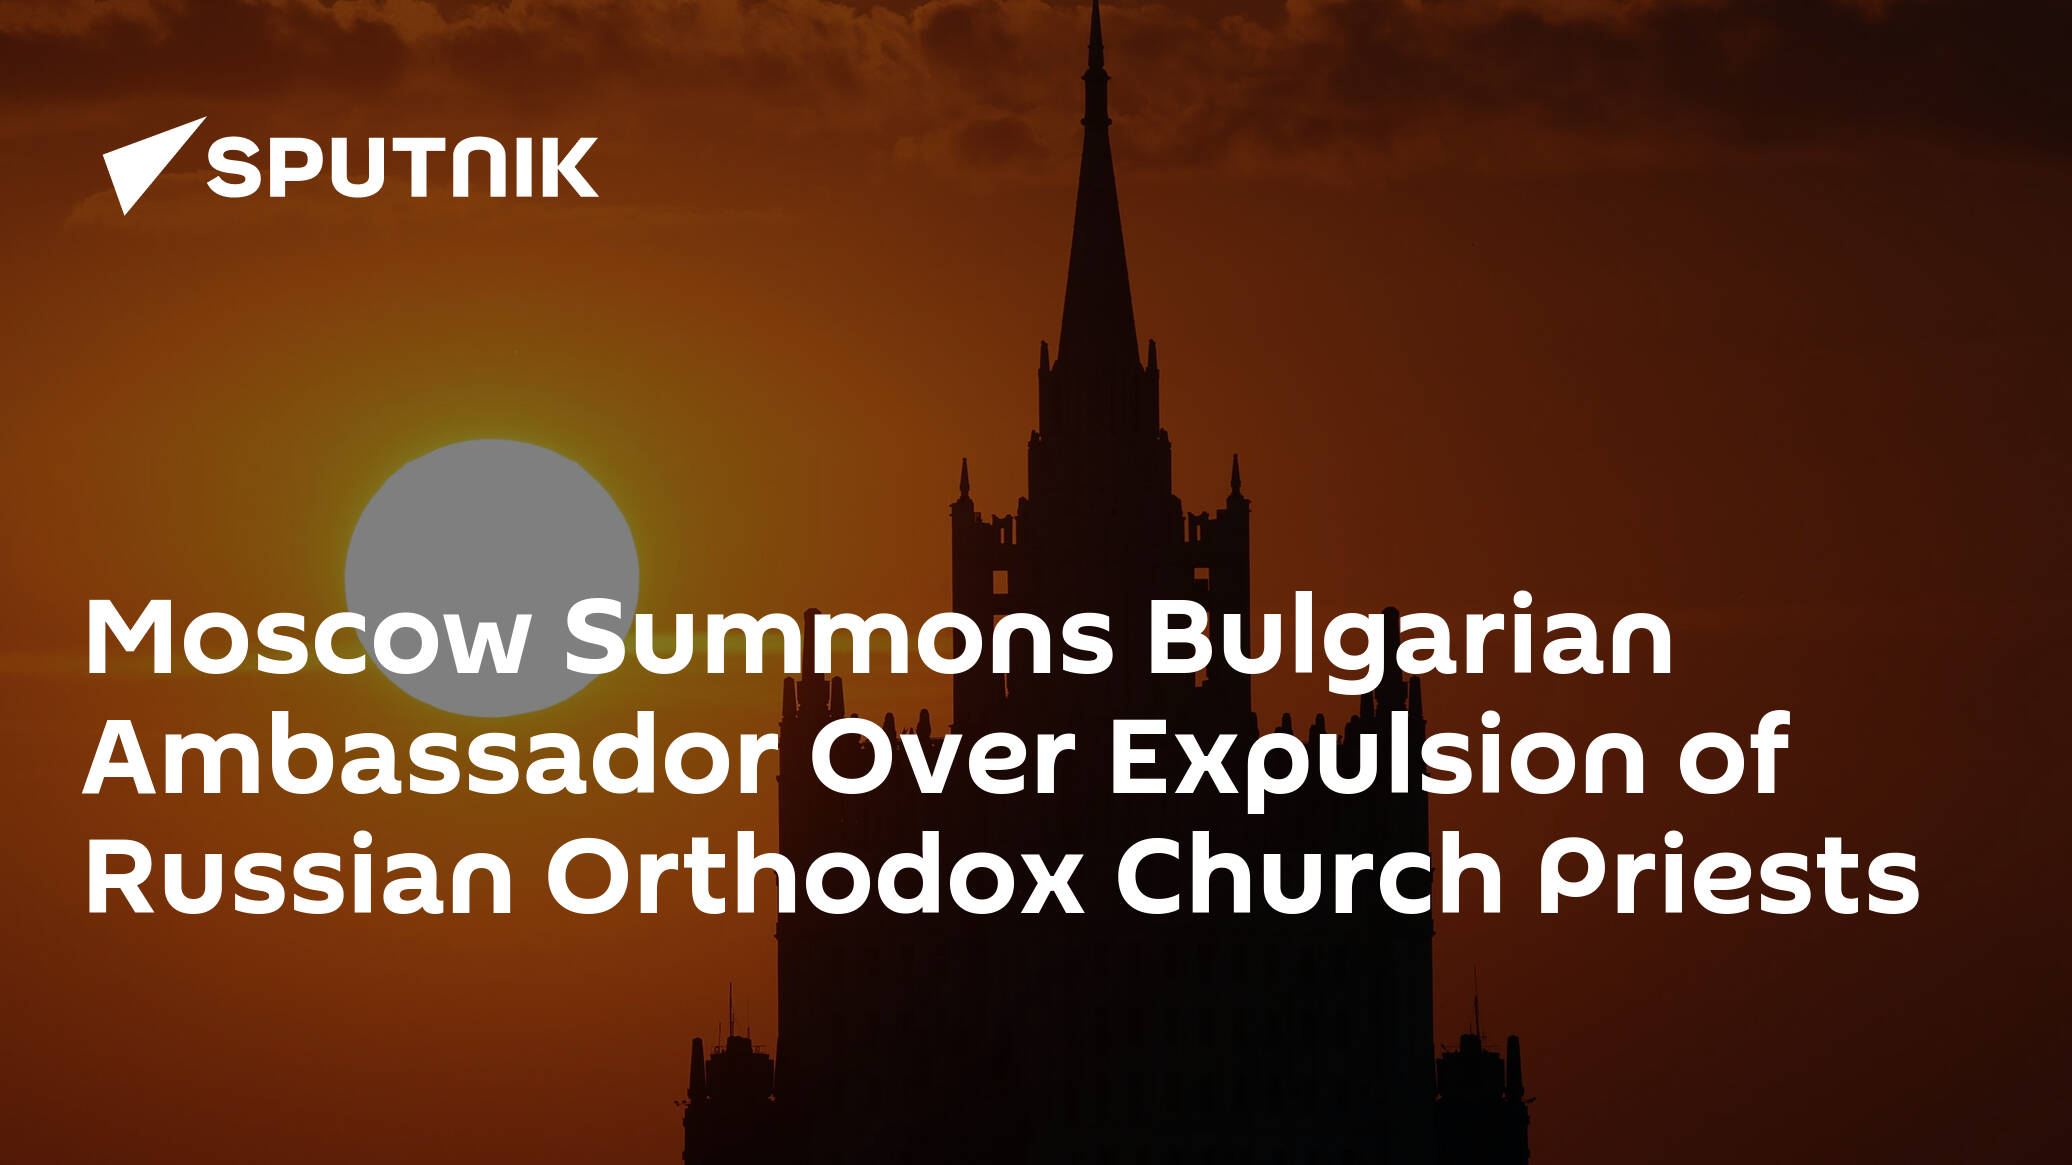 Moscow Summons Bulgarian Ambassador Over Expulsion of Russian Orthodox Church Priests